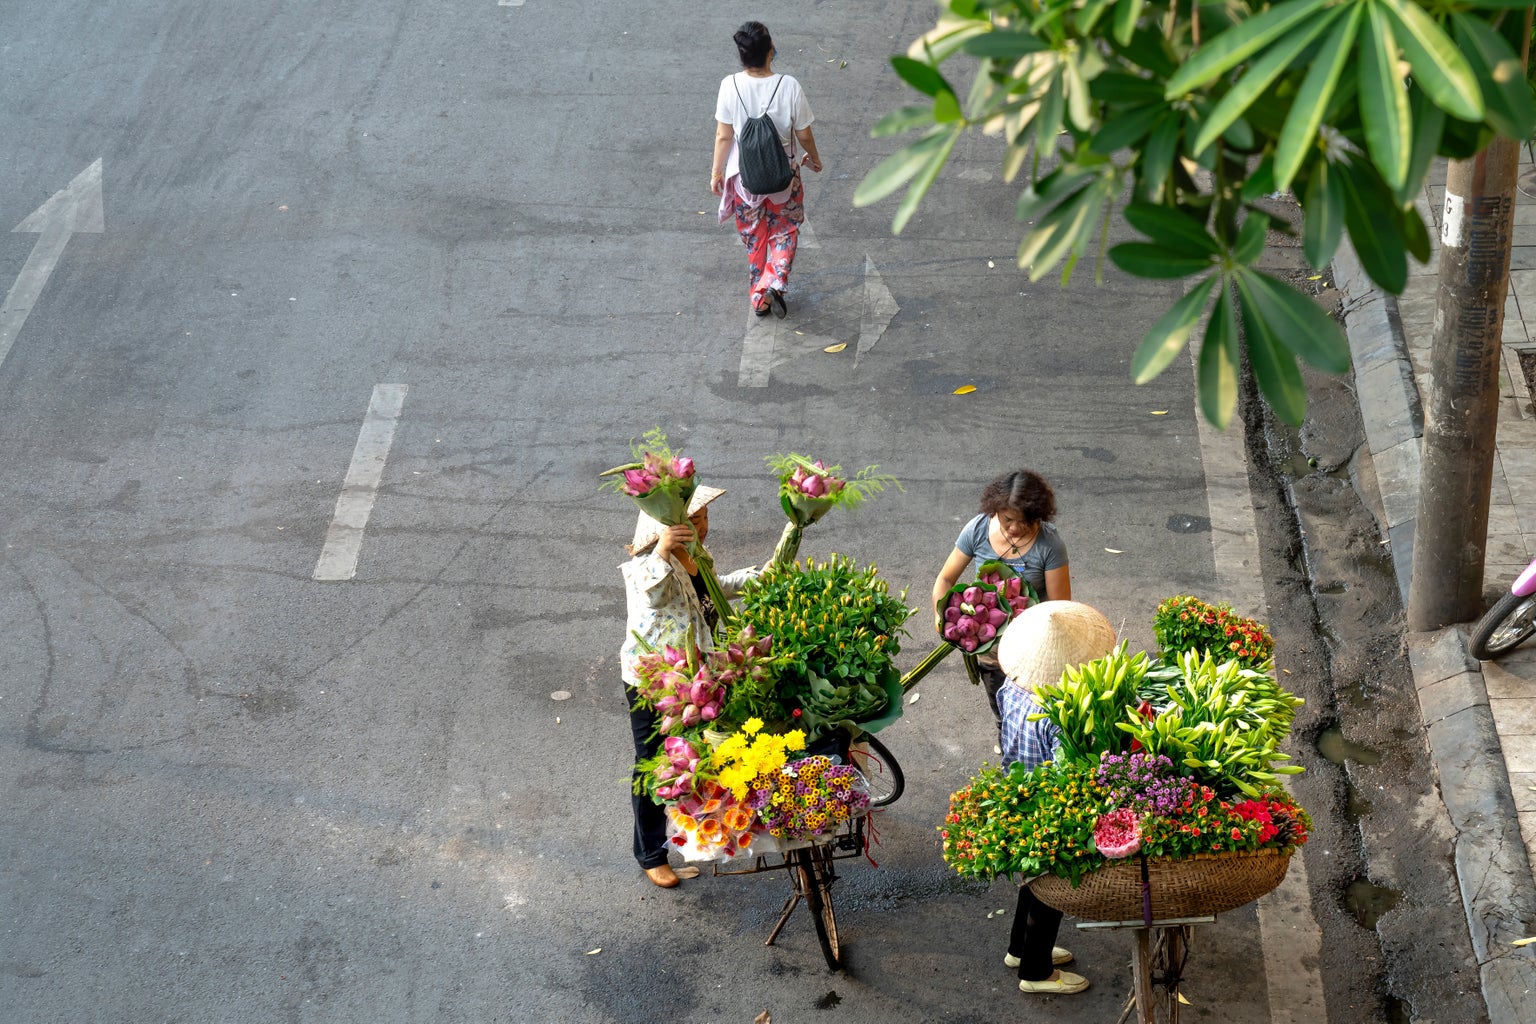 people selling and buying flowers in the street